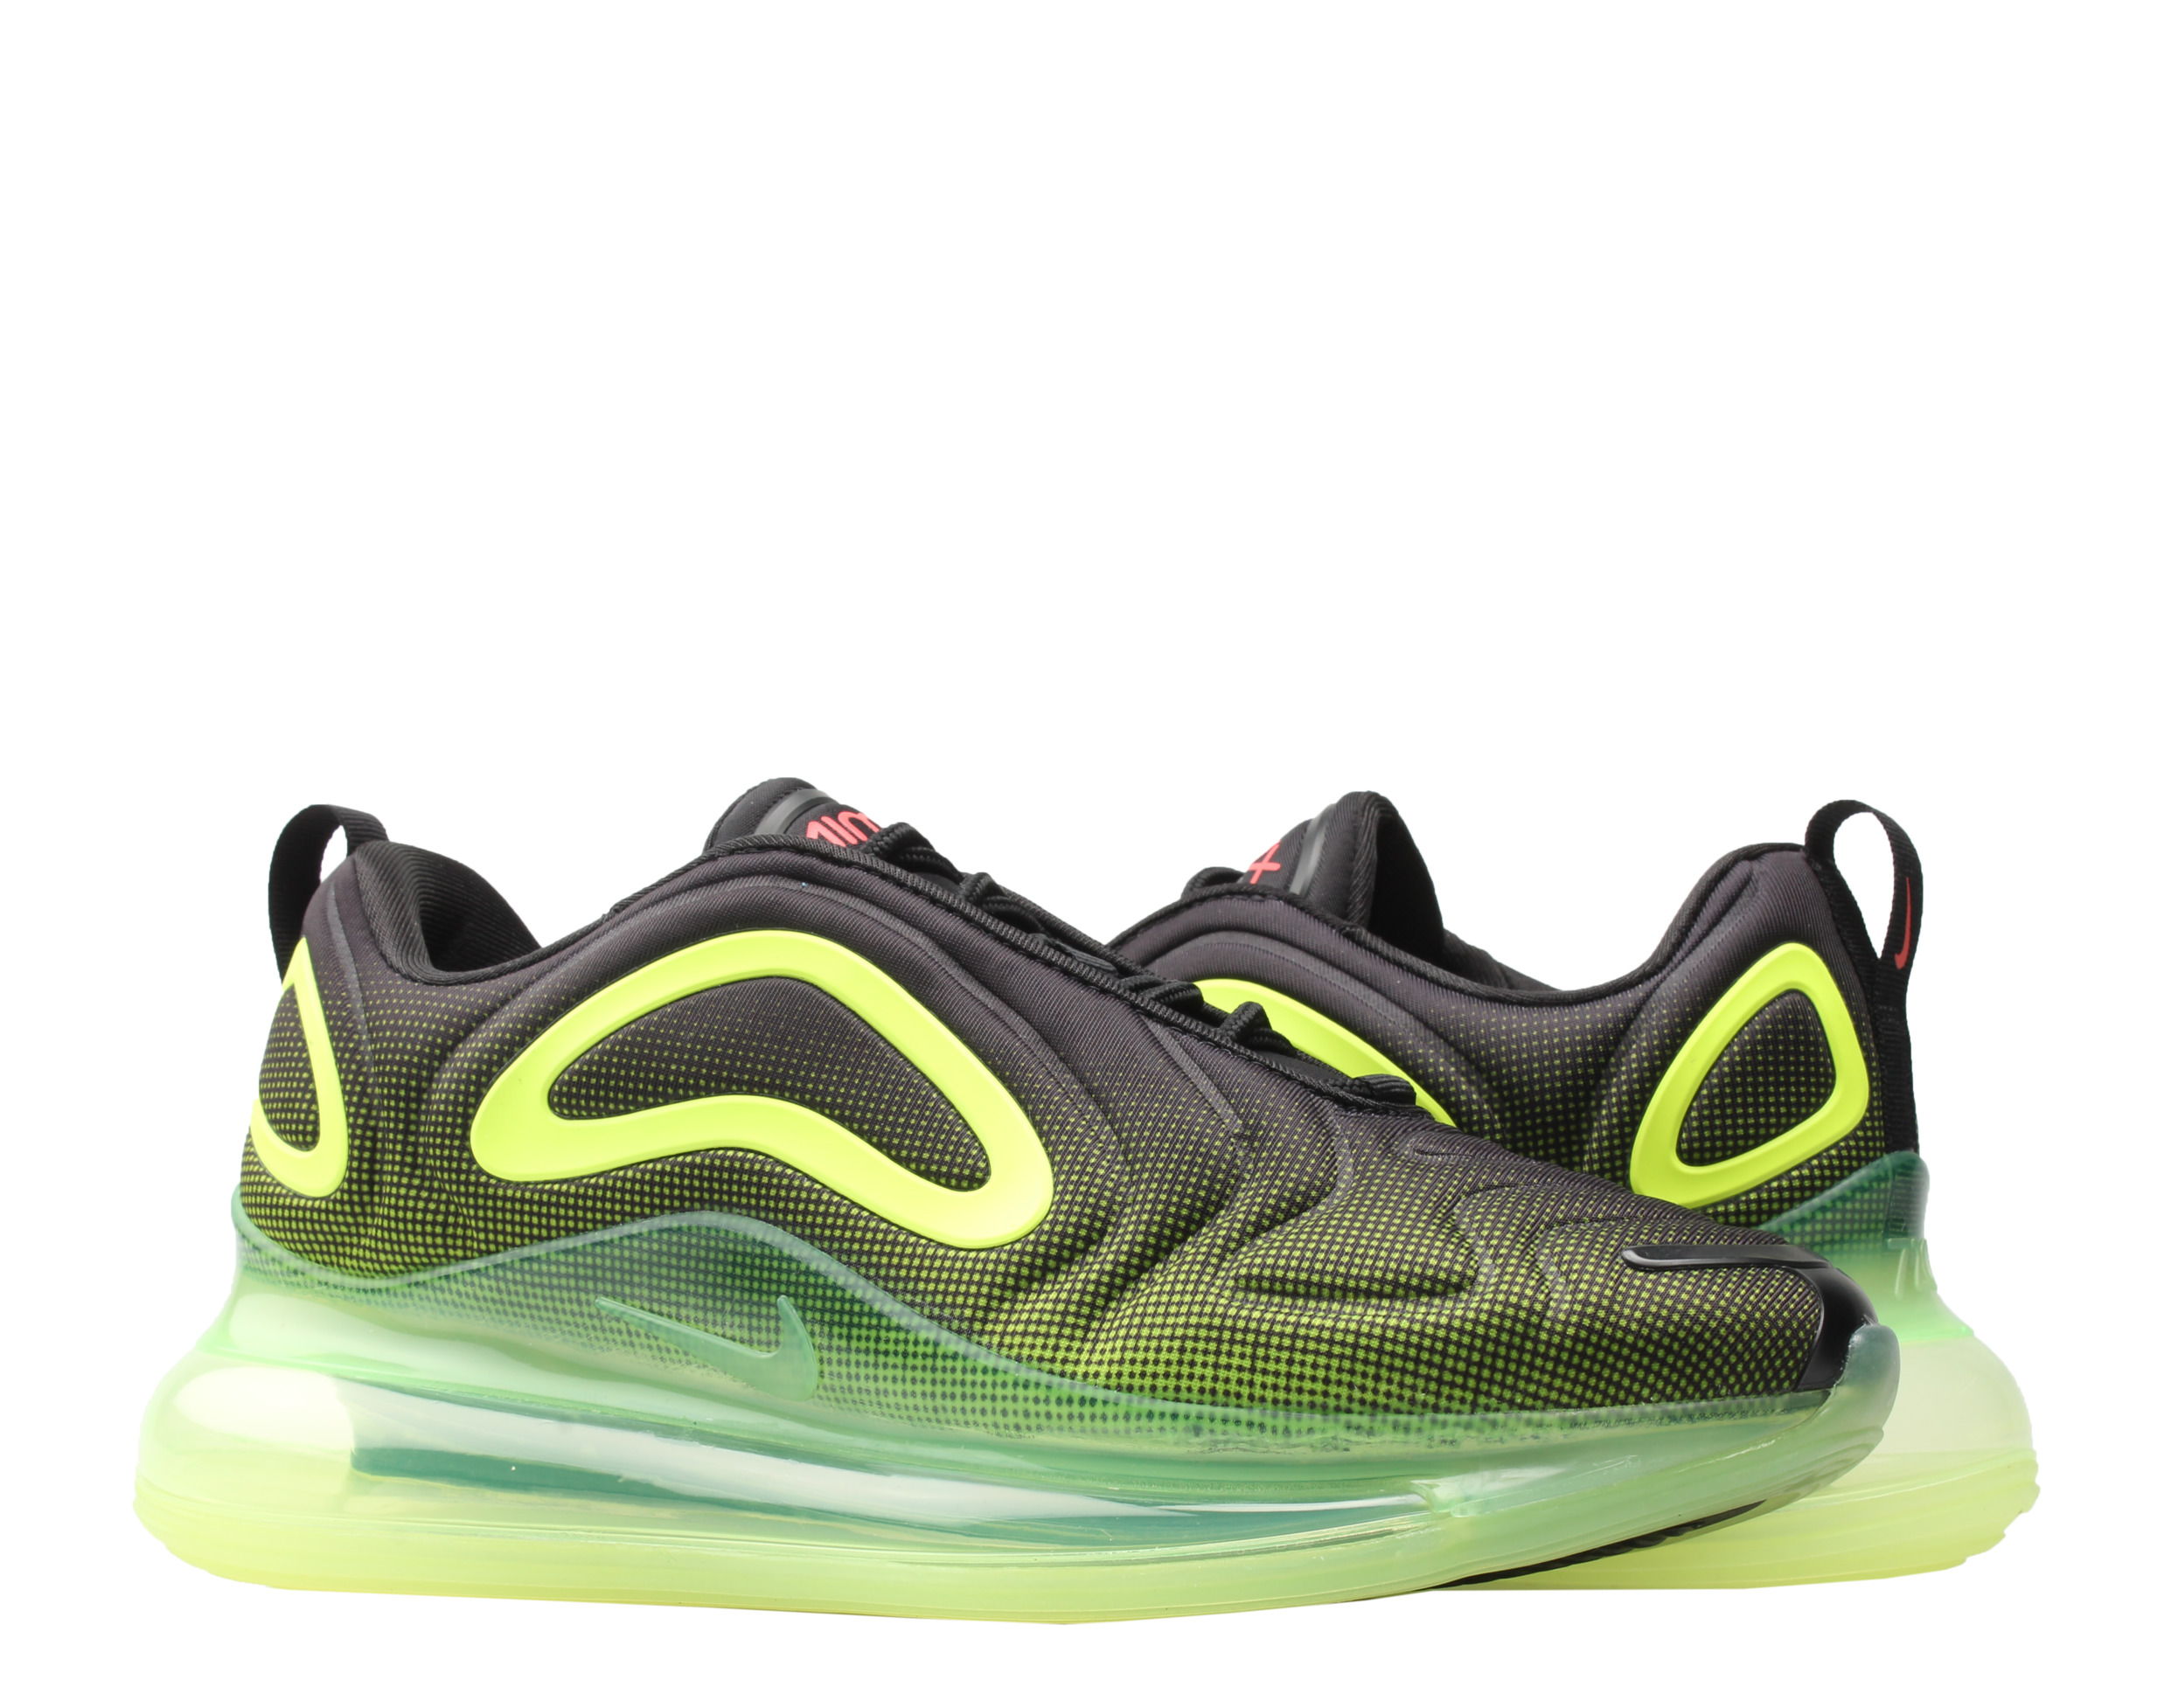 Nike Air Max 720 Men's Lifestyle Shoes Size 12 - image 1 of 6